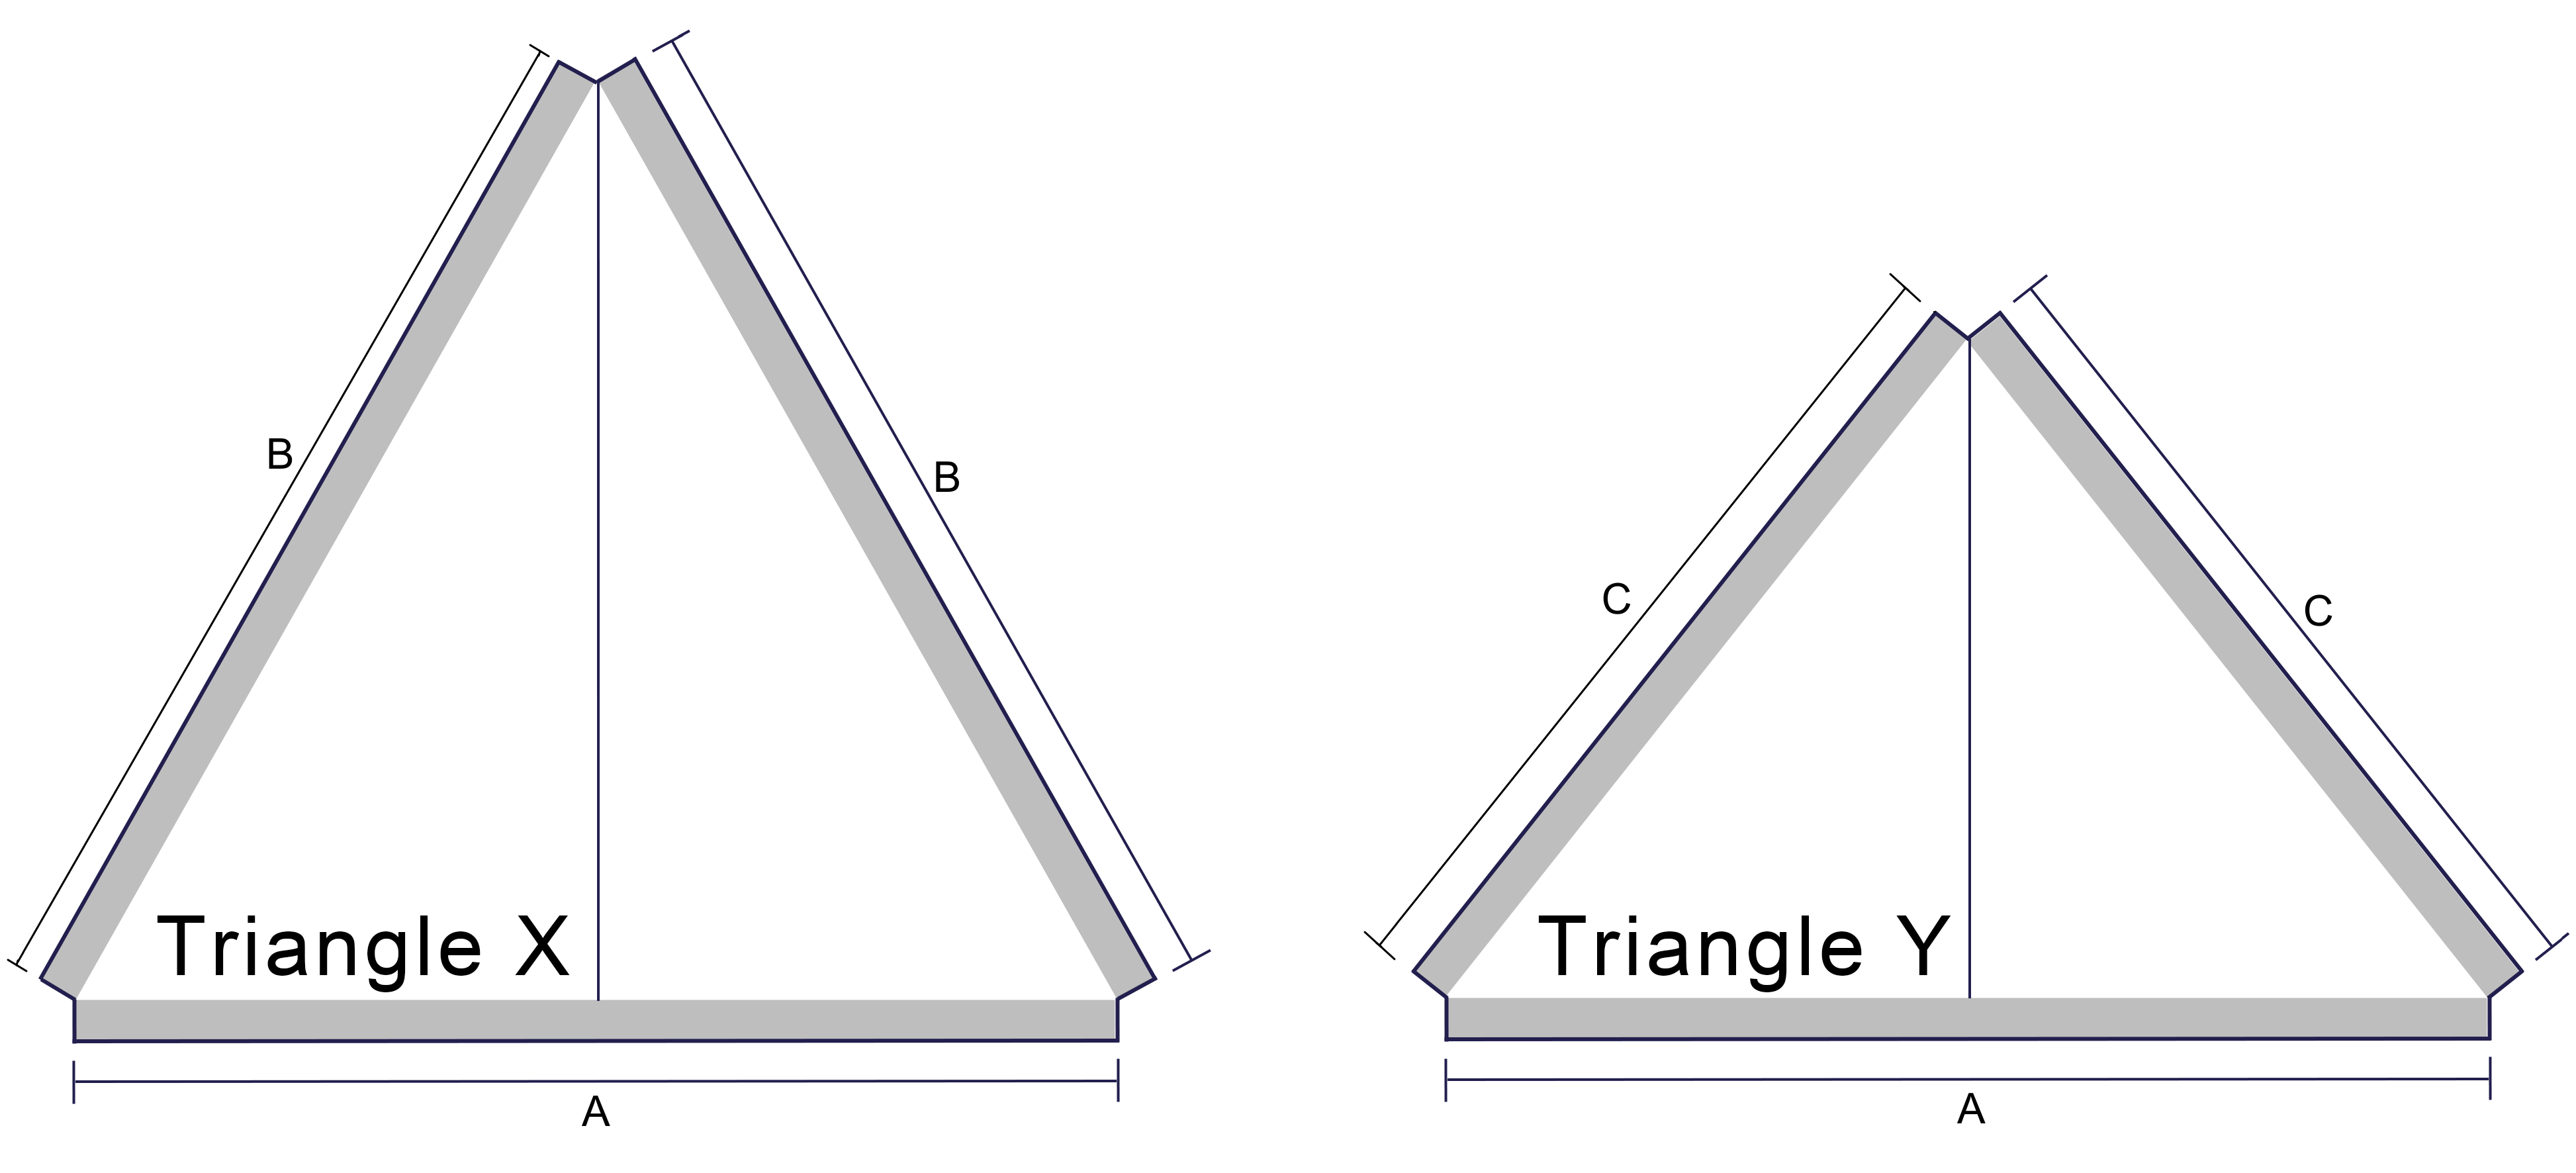 Triangles X and Y - Dimensions